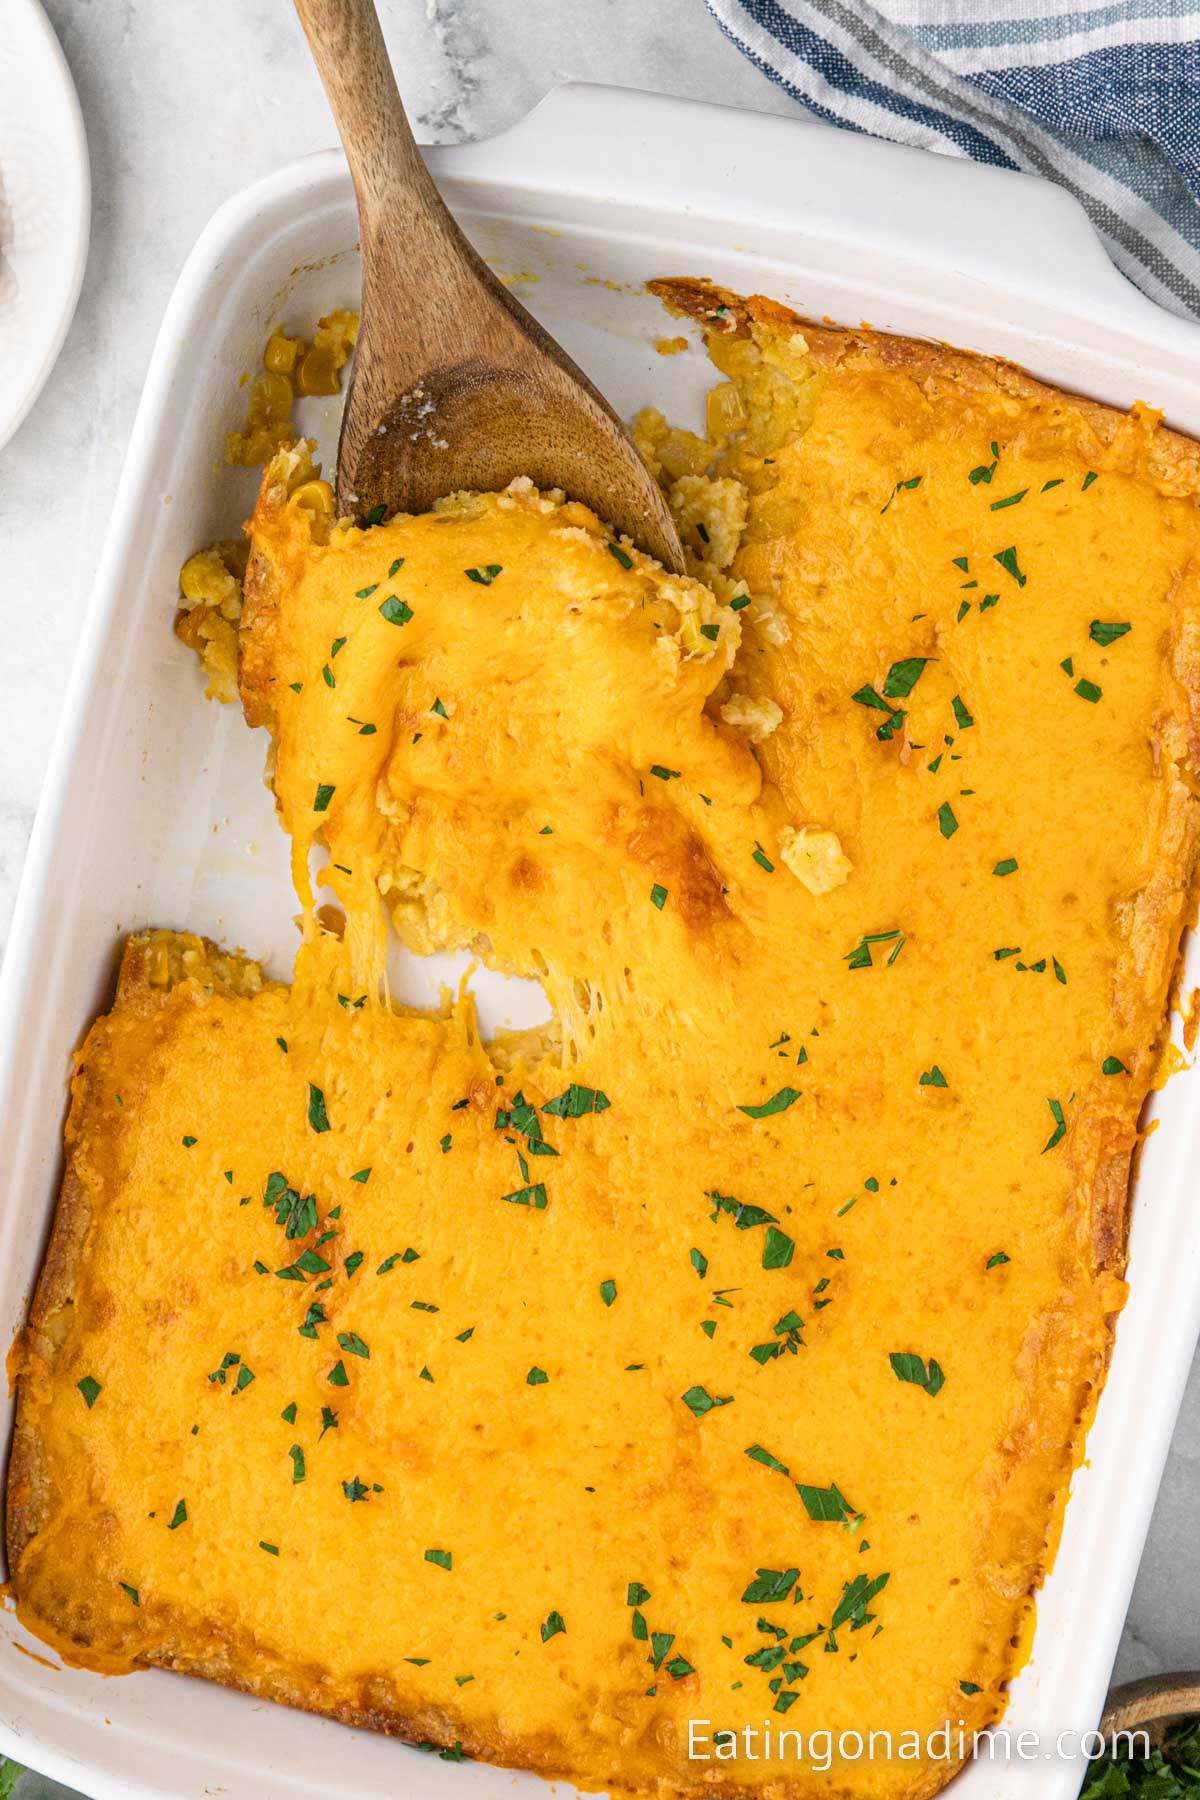 Corn casserole in a casserole dish with a wooden spoon